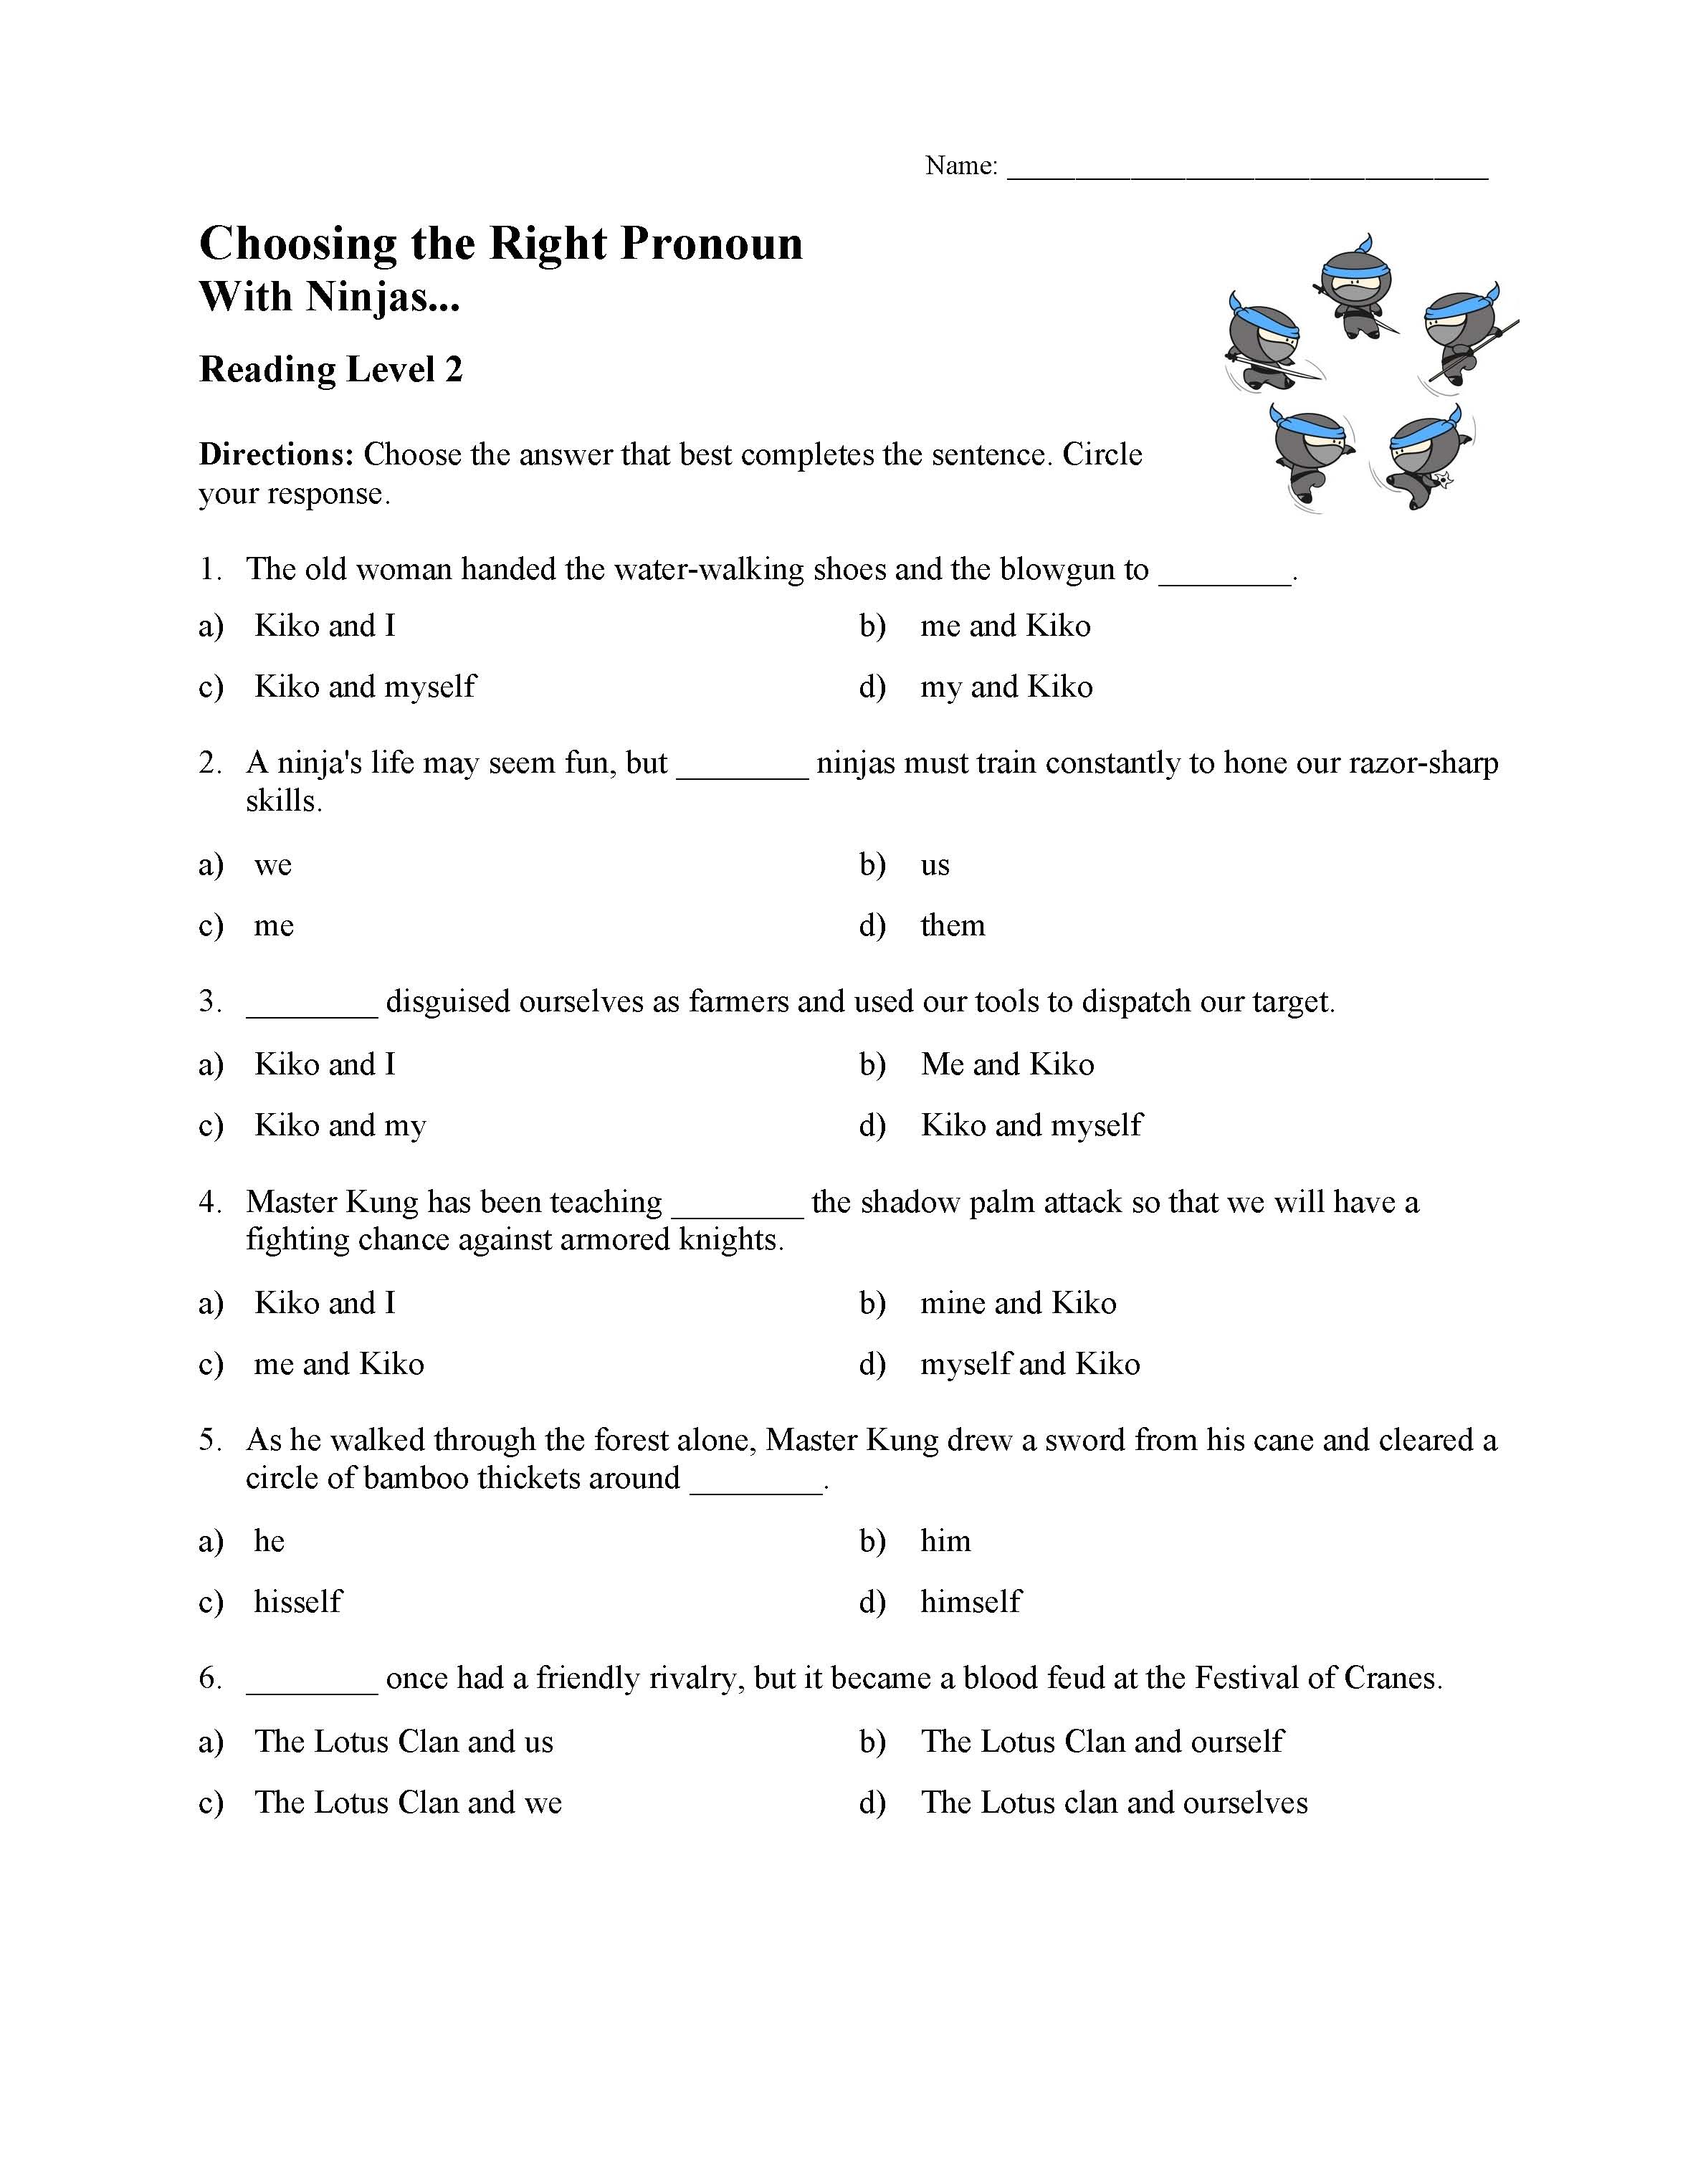 This is a preview image of the Choosing the Correct Pronoun Test with Ninjas - Reading Level 2.